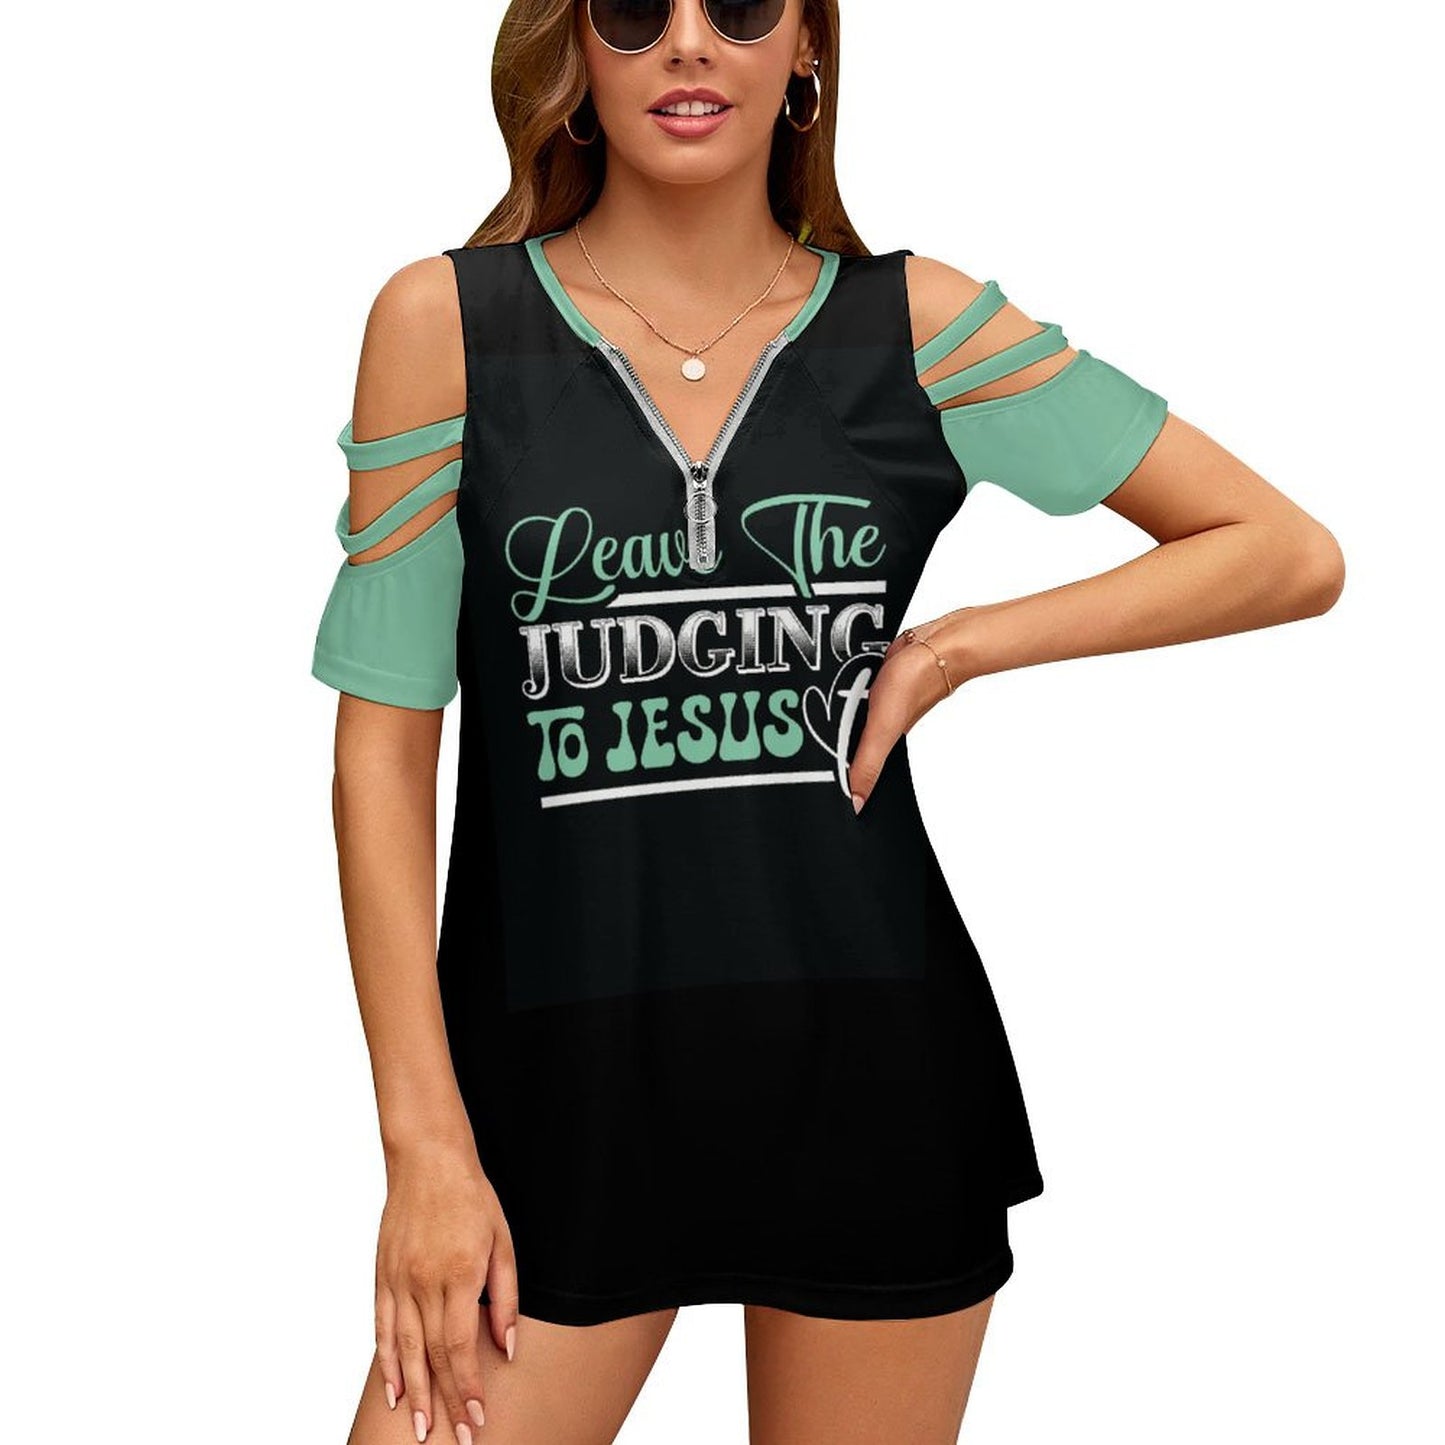 Leave The Judging To Jesus Women's Christian T-shirt SALE-Personal Design